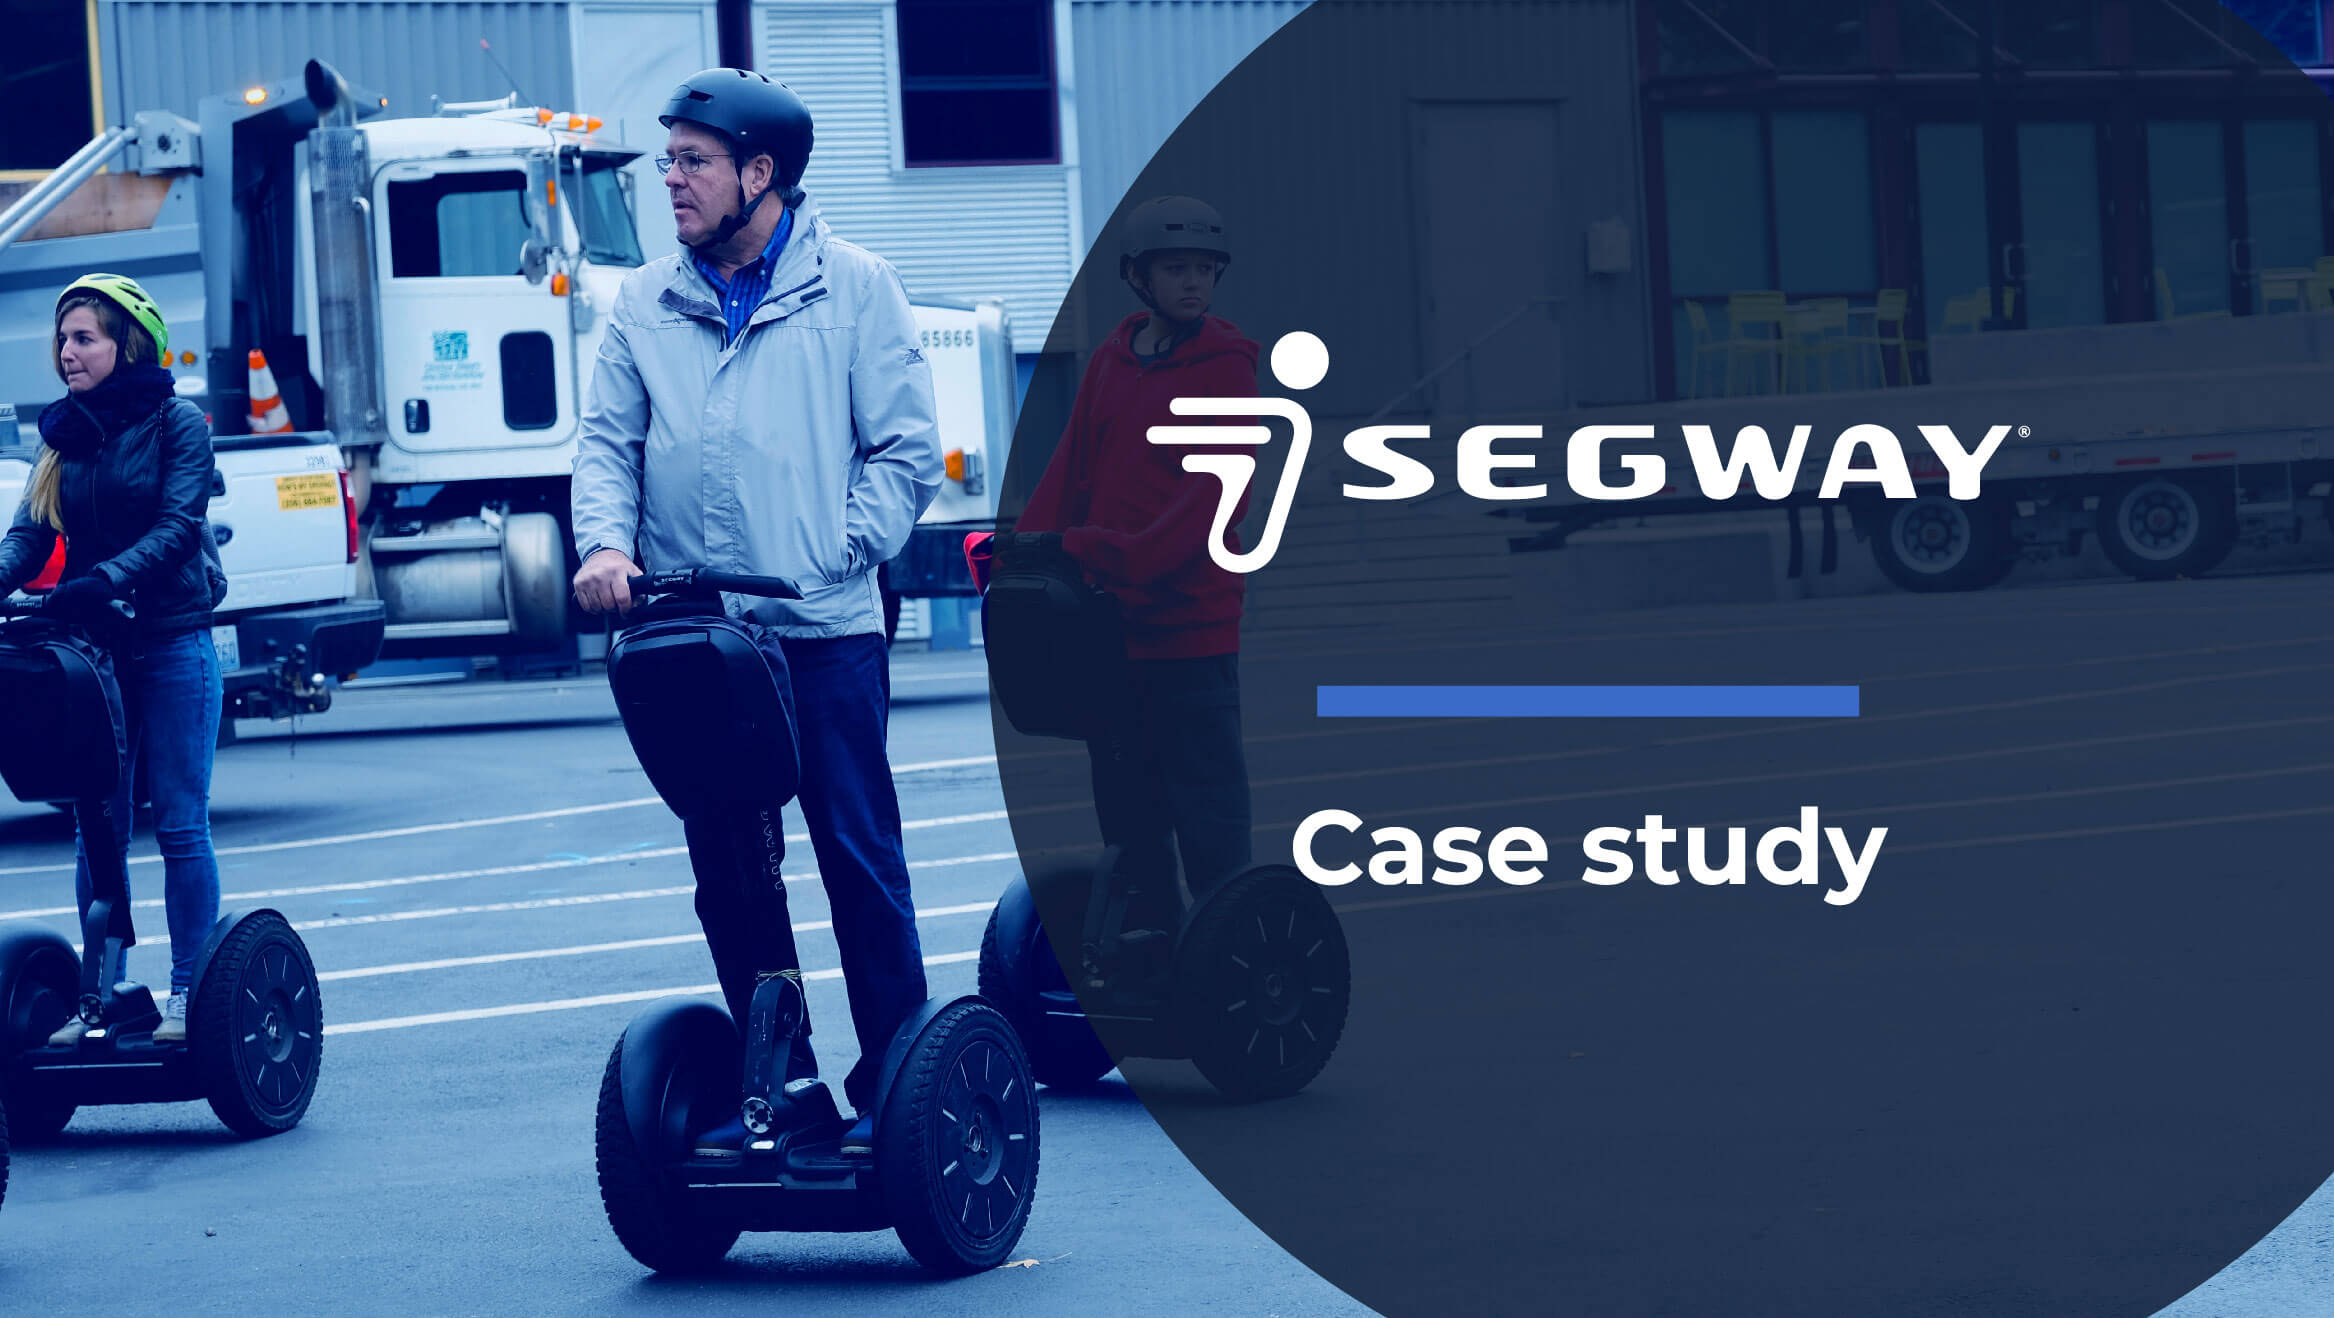 Segway to End Production of Its Original Personal Transporter